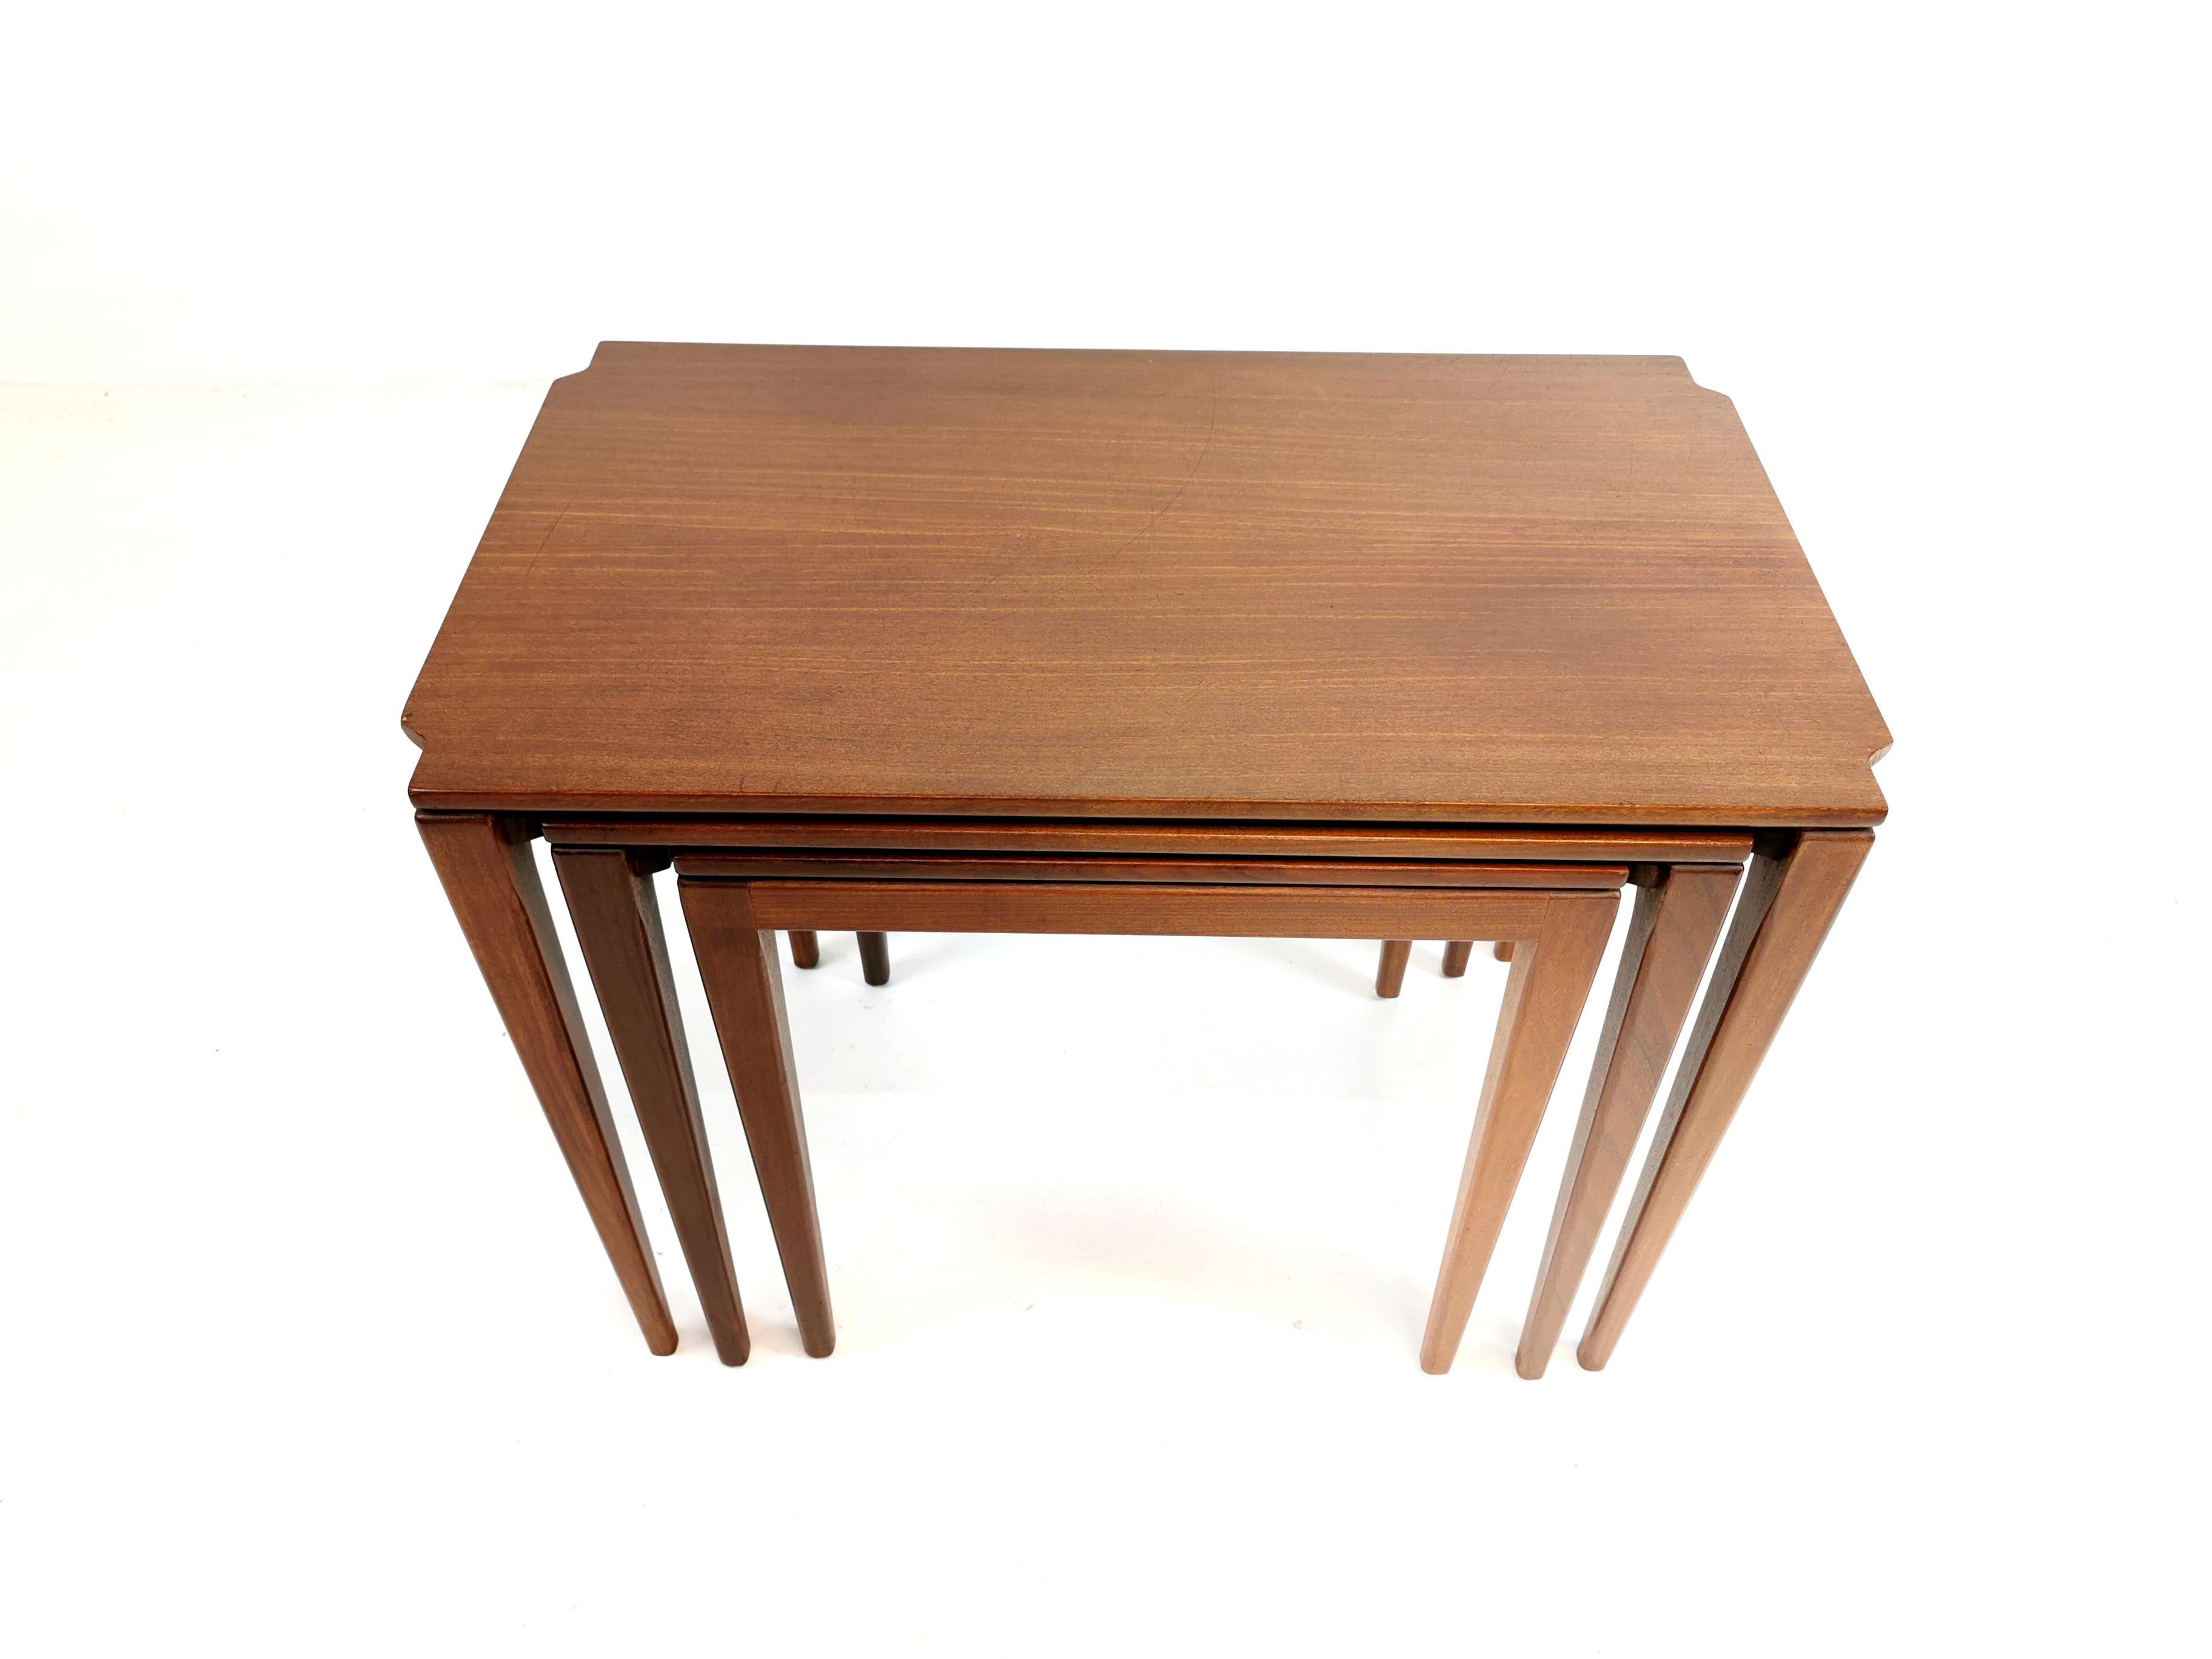 Nest of 3 teak coffee tables. 

This set of tables were designed by Richard Hornby circa 1960s. His elegantly crafted furniture was manufactured by Fyne Ladye Furniture of Bath, UK.

The tables are made of Afromosia wood. Featuring Hornby